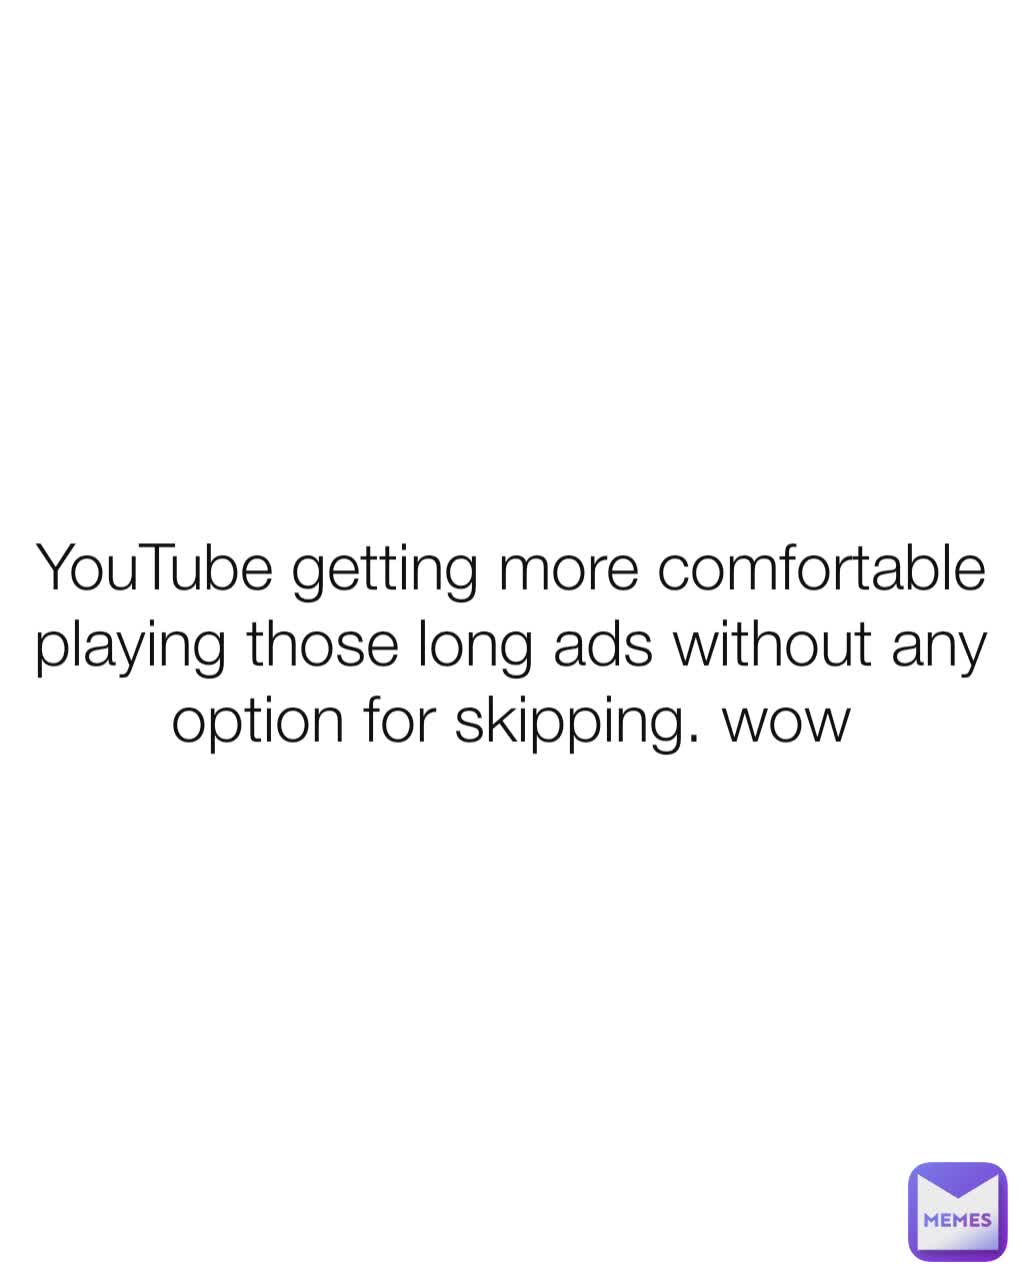 YouTube getting more comfortable playing those long ads without any option for skipping. wow